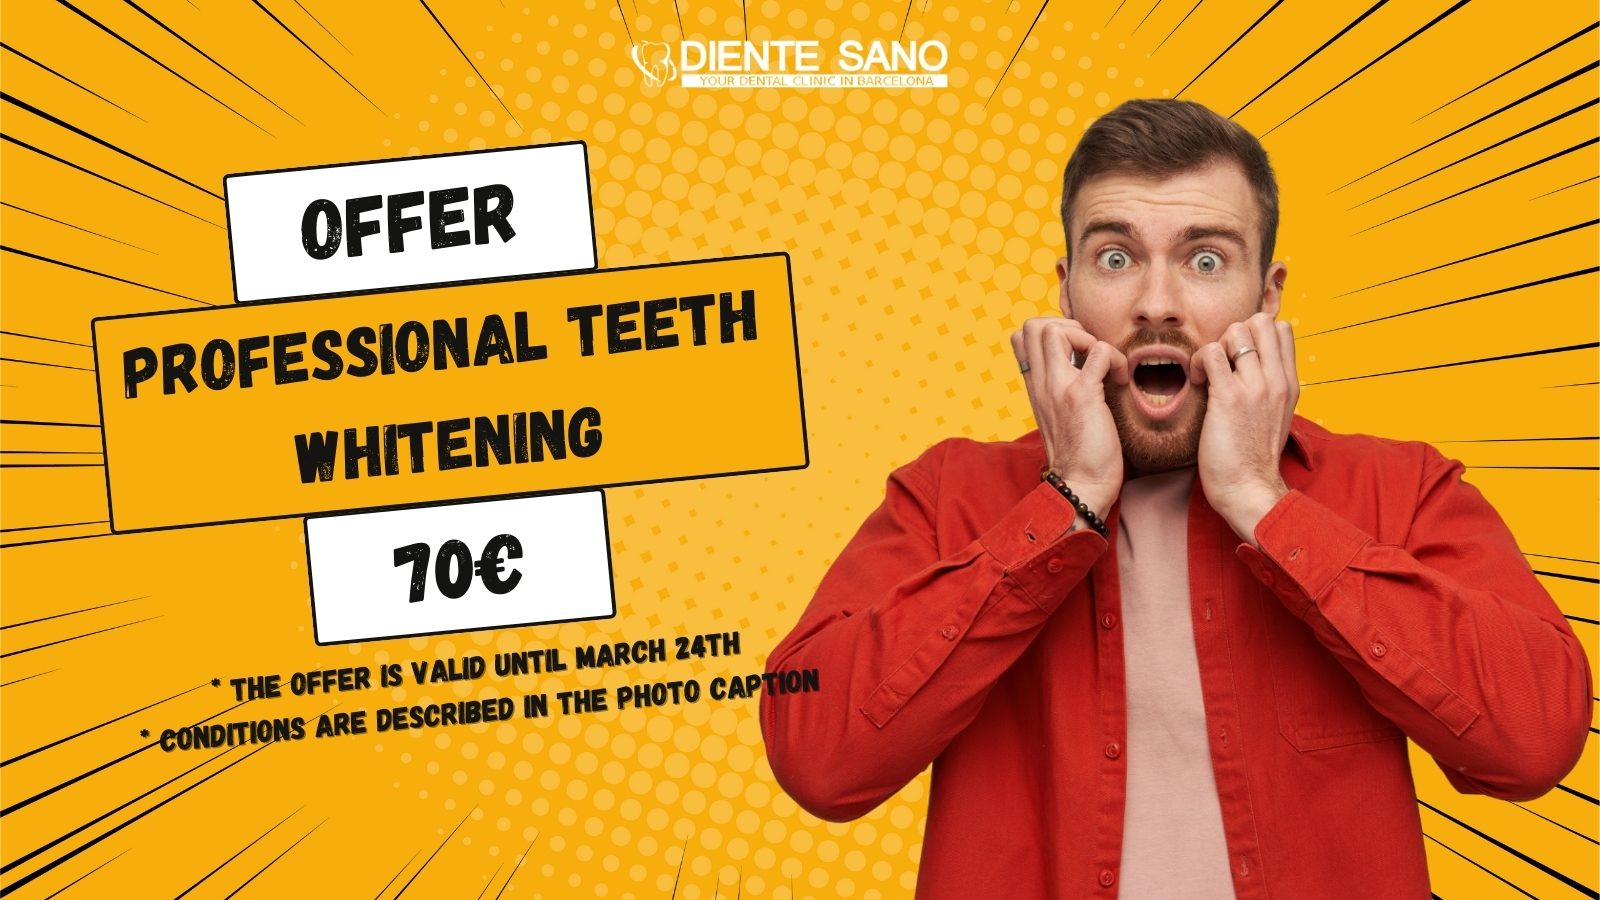 Light up your smile with a new glow with the brilliant offer from Diente Sano Dental Clinic in Barcelona! Seize this unique opportunity to make your smile even brighter and more attractive thanks to professional whitening at our clinic for just 70 euros!